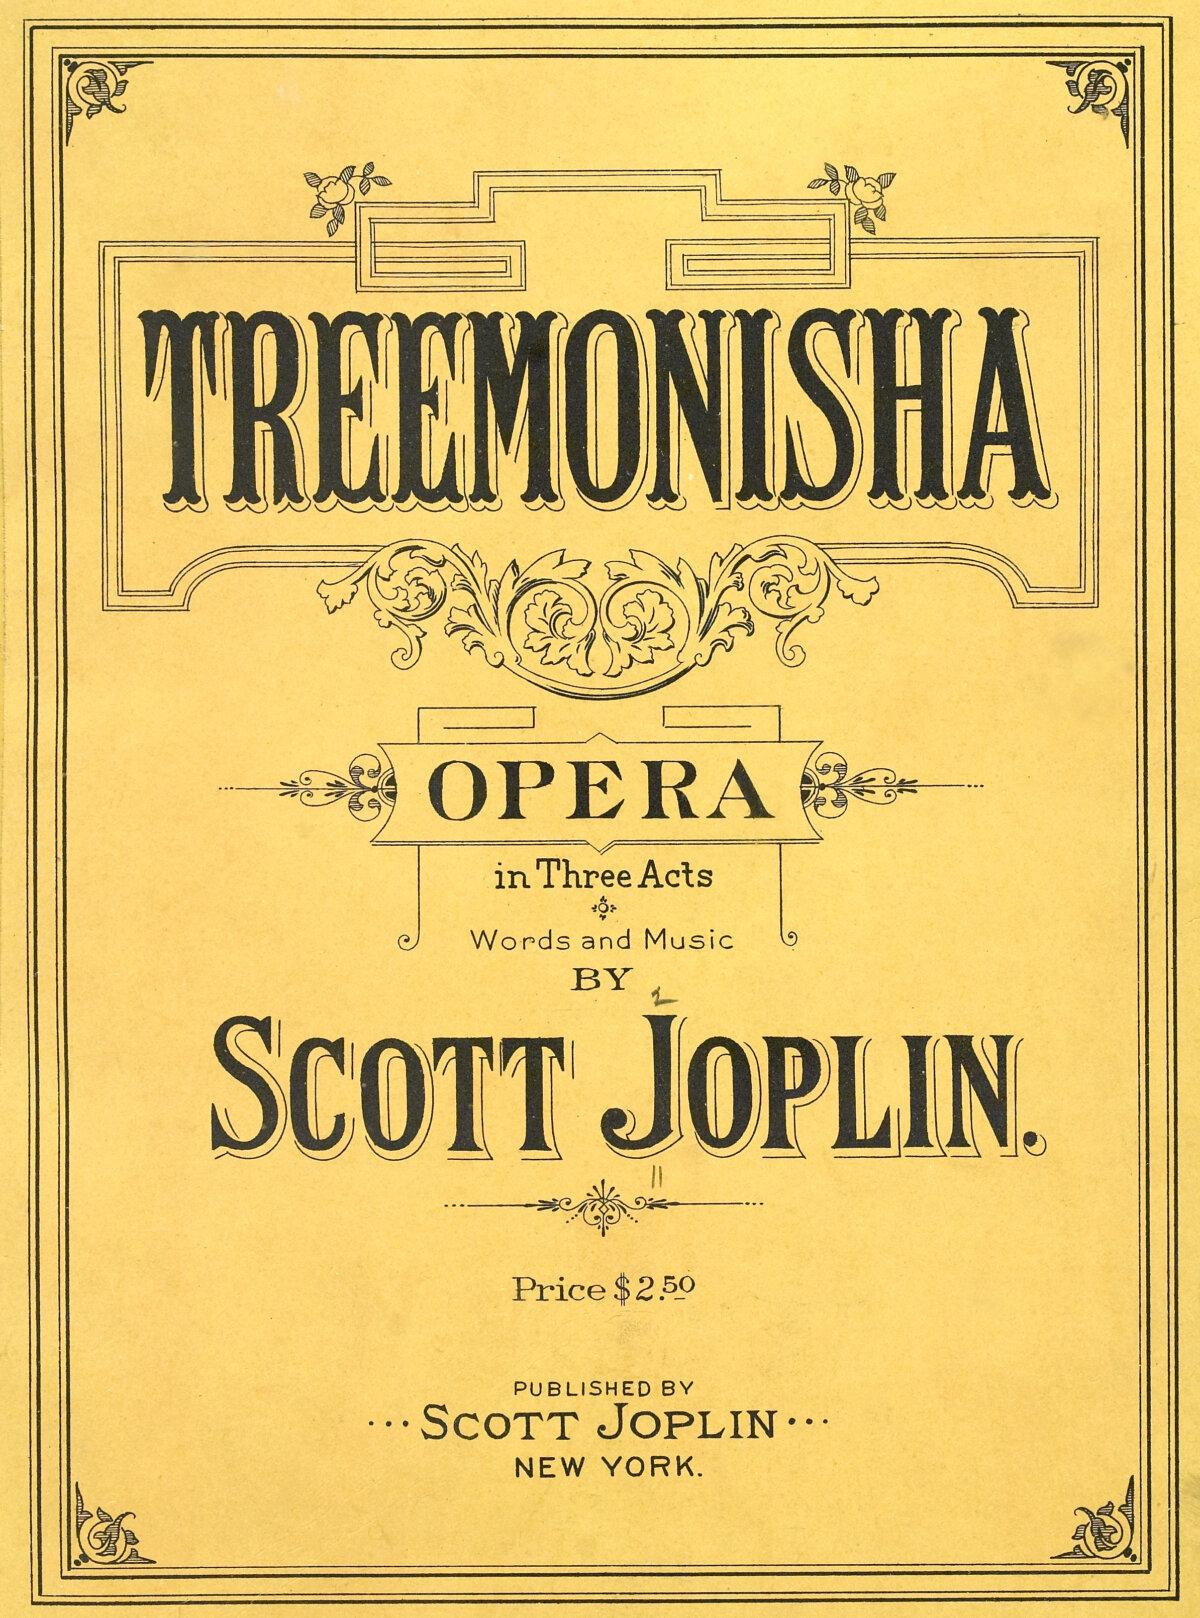 Cover of sheet music to the opera Treemonisha by Scott Joplin, published in New York City in 1911. (Public Domain)